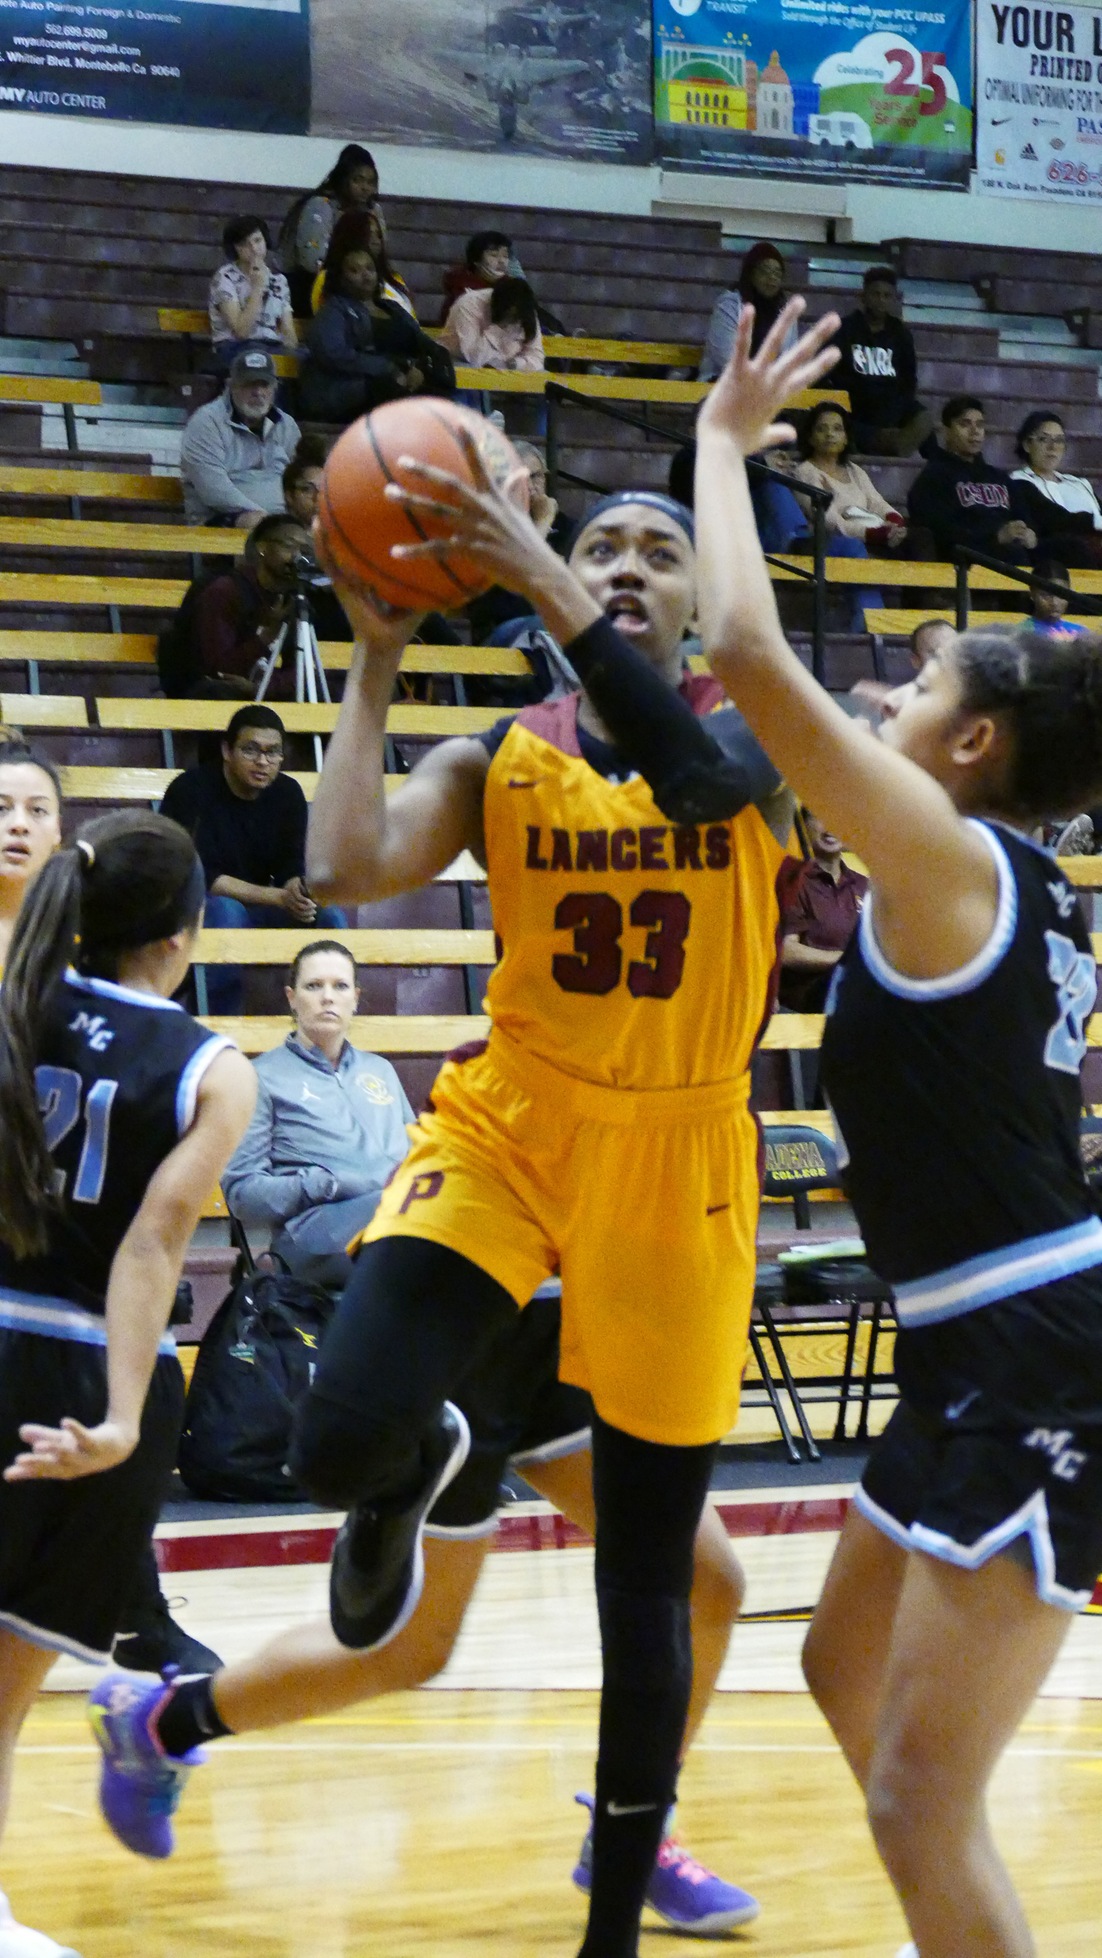 Dariel Johnson in a recent home game. She scored 20 points and grabbed 20 rebounds in Friday's win, photo courtesy of Ken McLin.